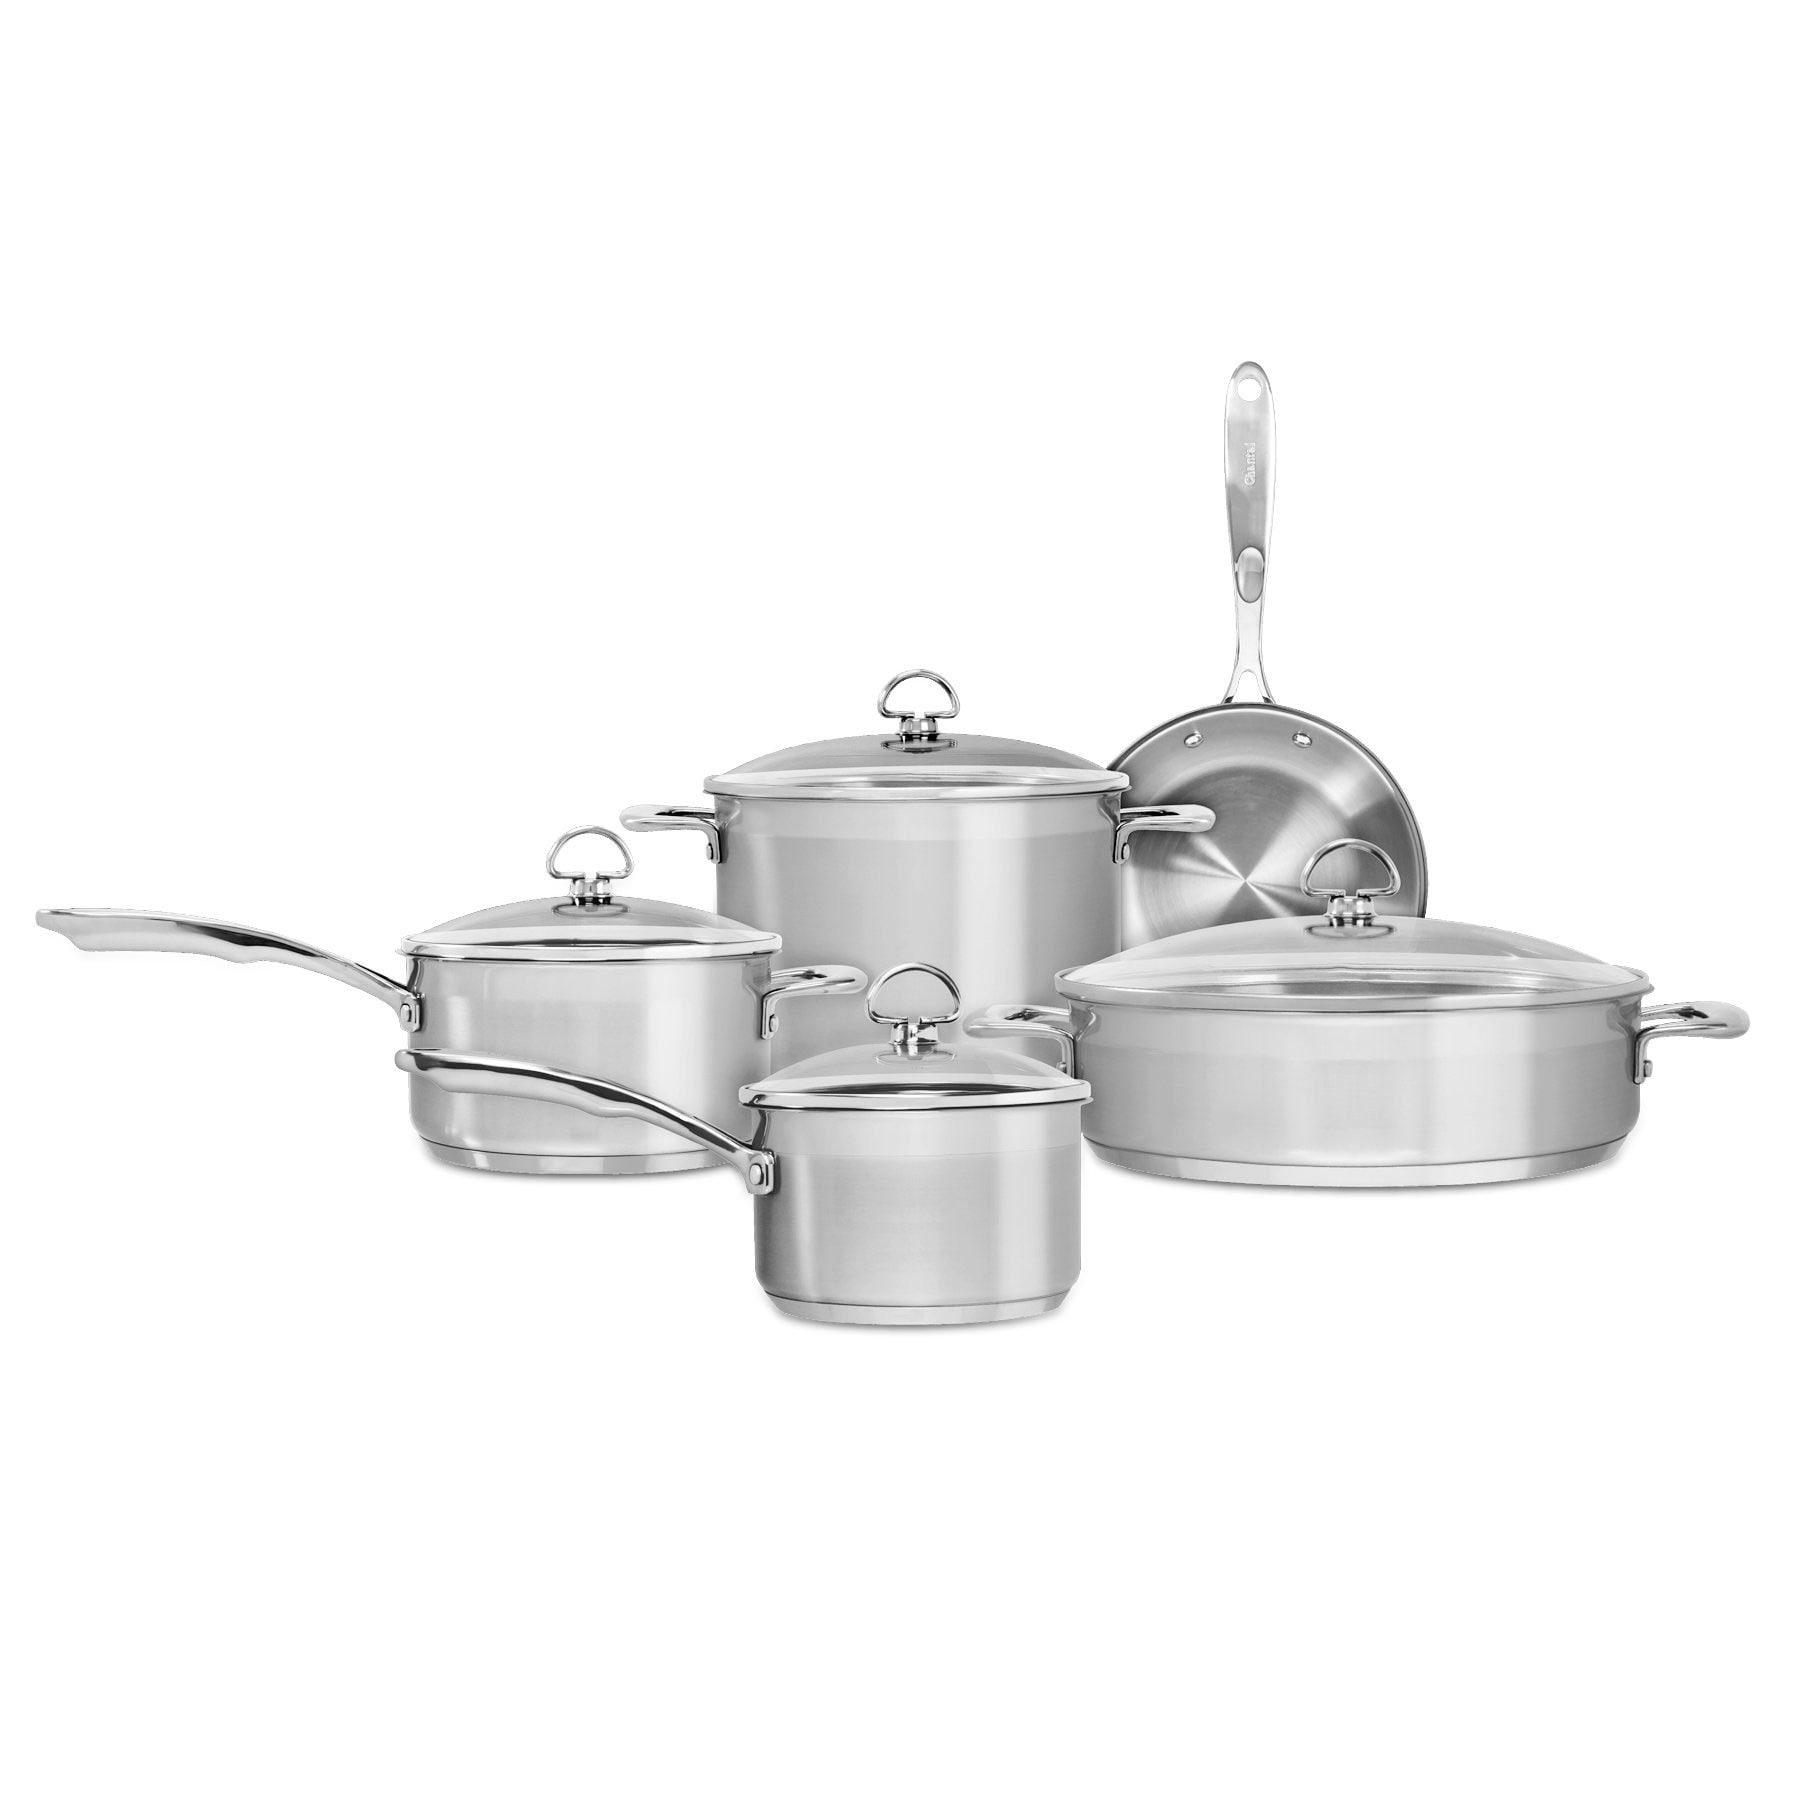 Chantal Induction 21 2 quart Saucepan with Ceramic nonstick Coating and  glass lid